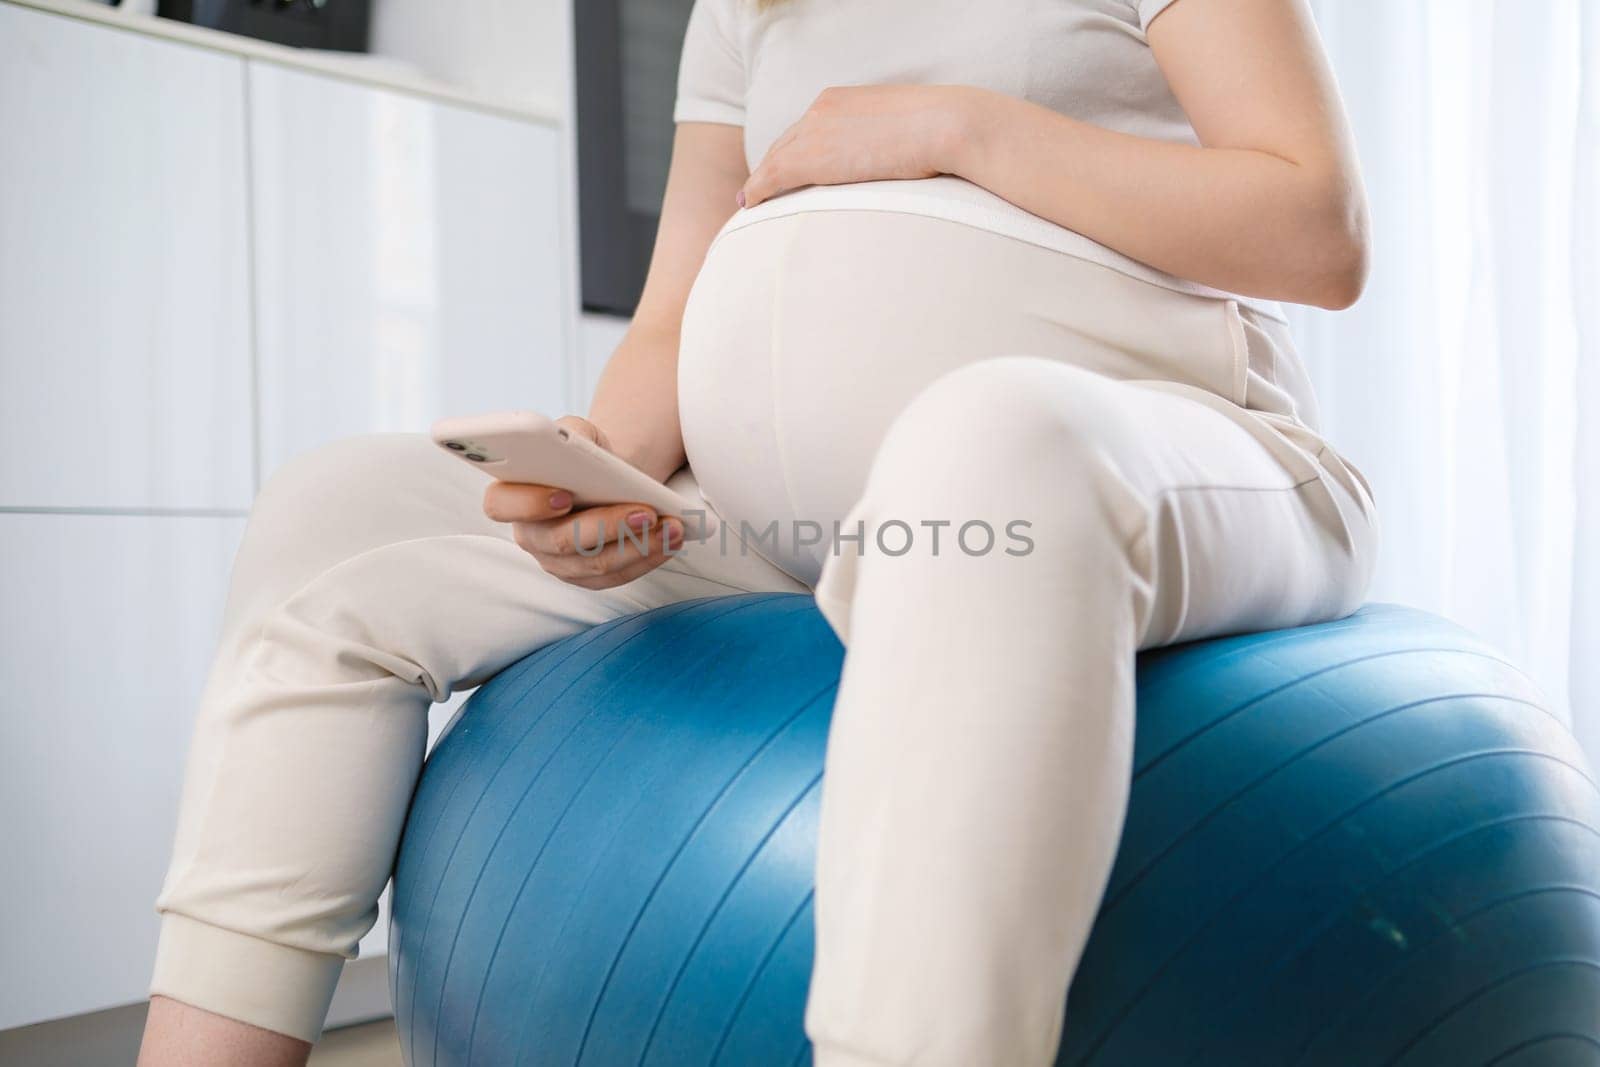 Pregnant woman uses a mobile phone while sitting on the fit ball.